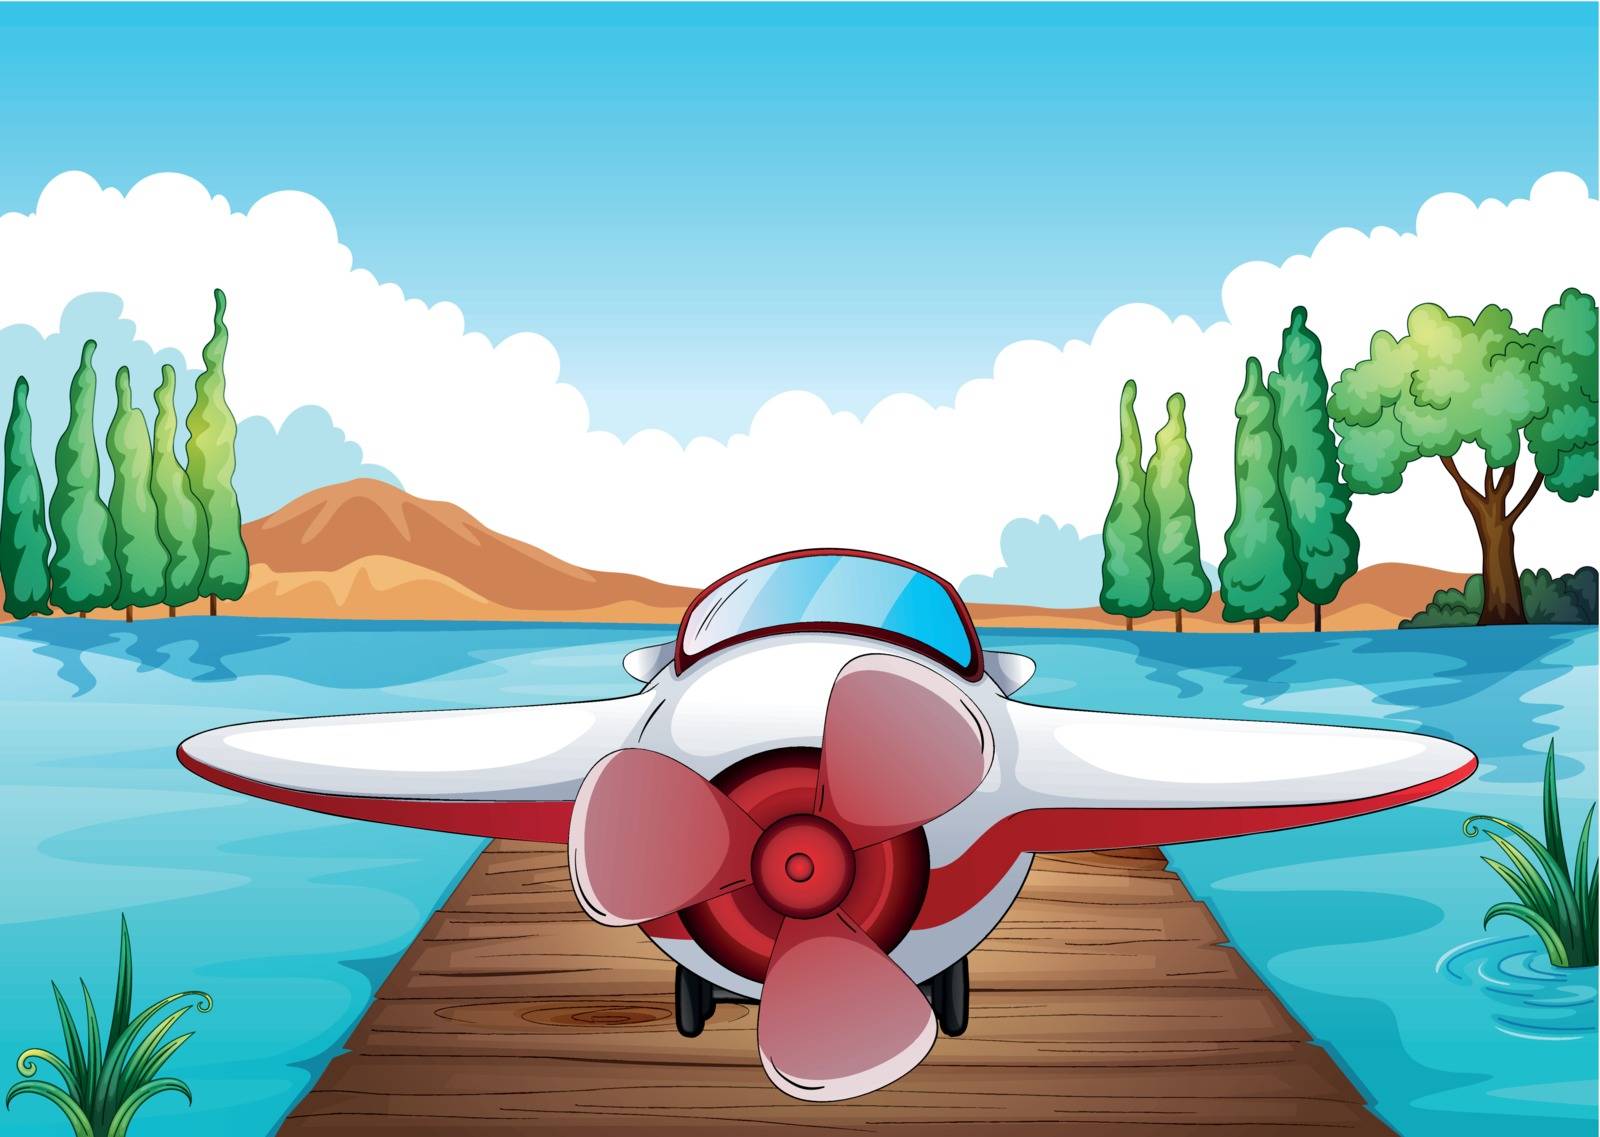 illustration of a jetty and an aeroplane in a beautiful nature